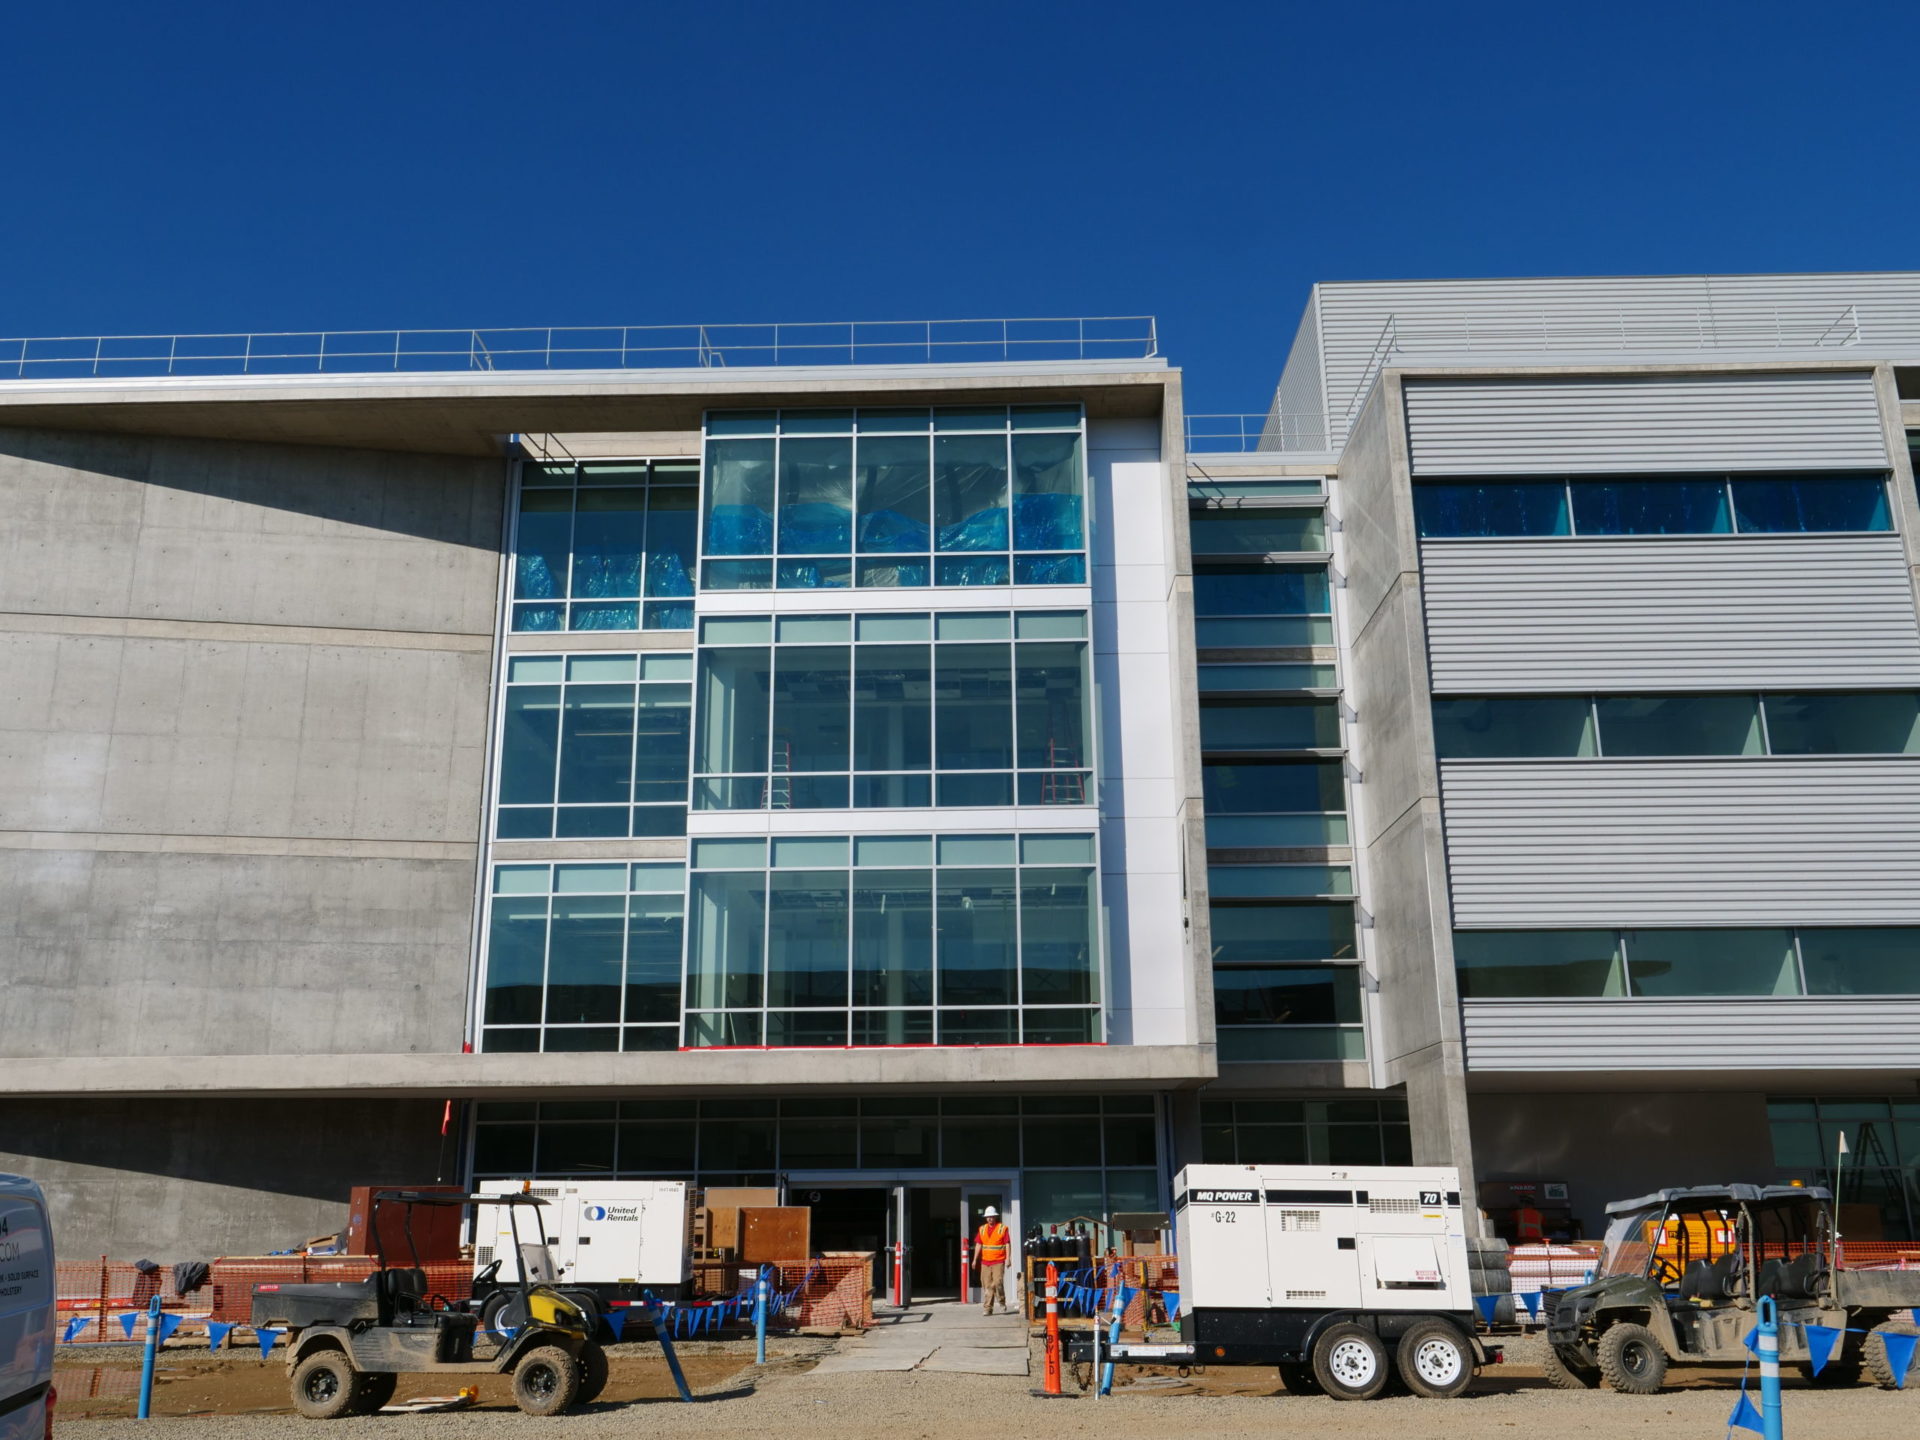 Image from the Gallery: UC Merced 2020 – Central Valley, CA